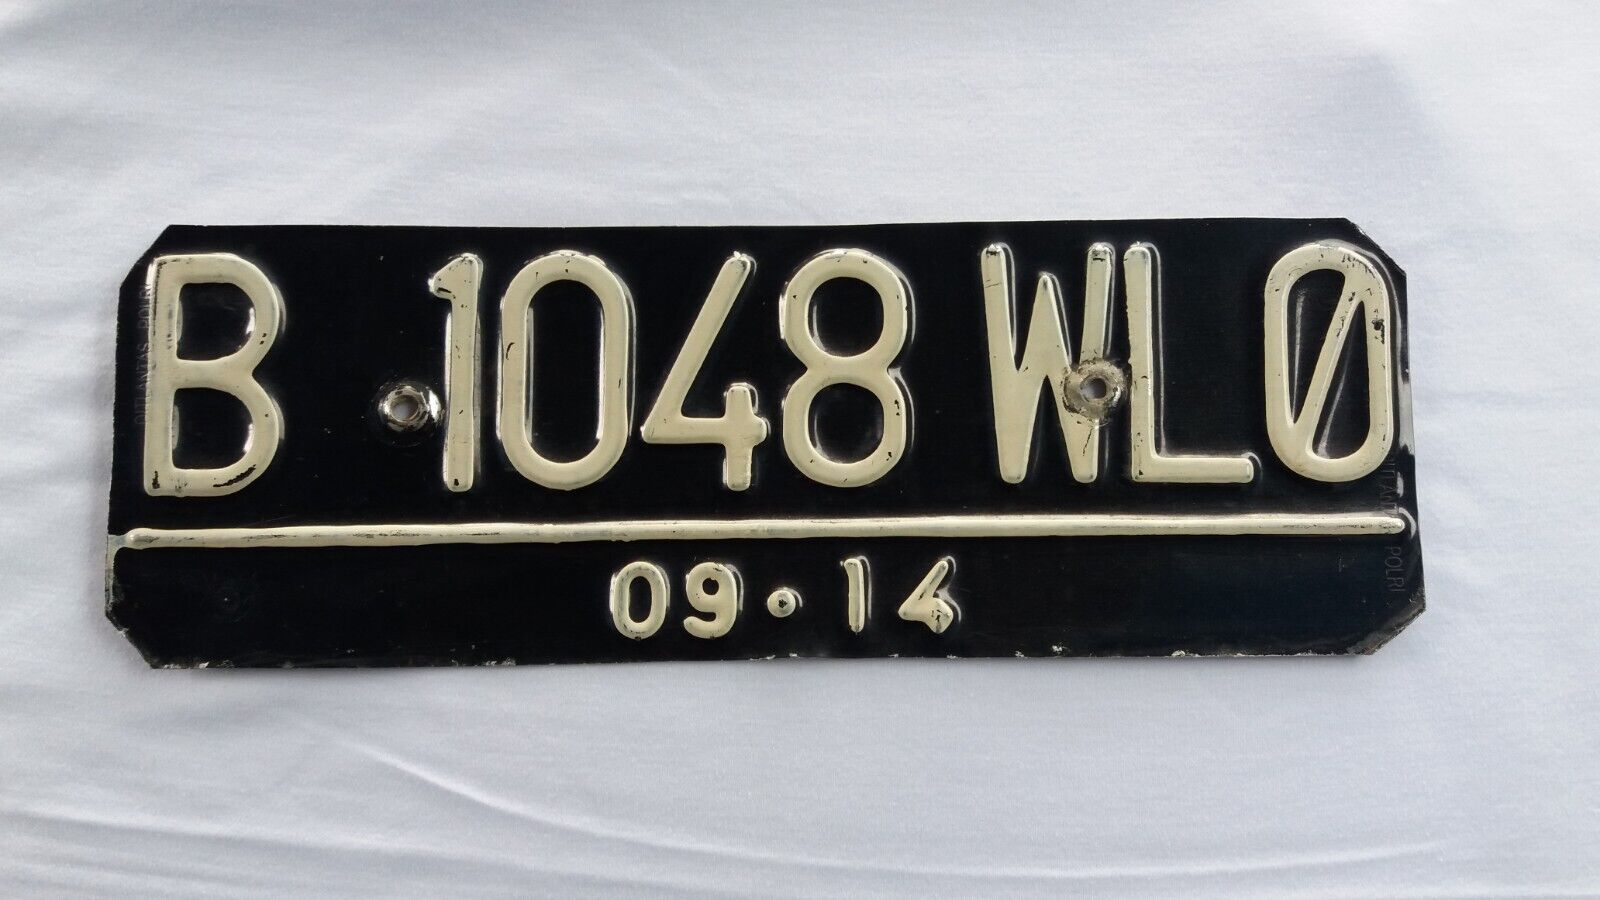 1 Pc Used Original Collectible License Car Plate B 1048 WLQ Indonesia 2014